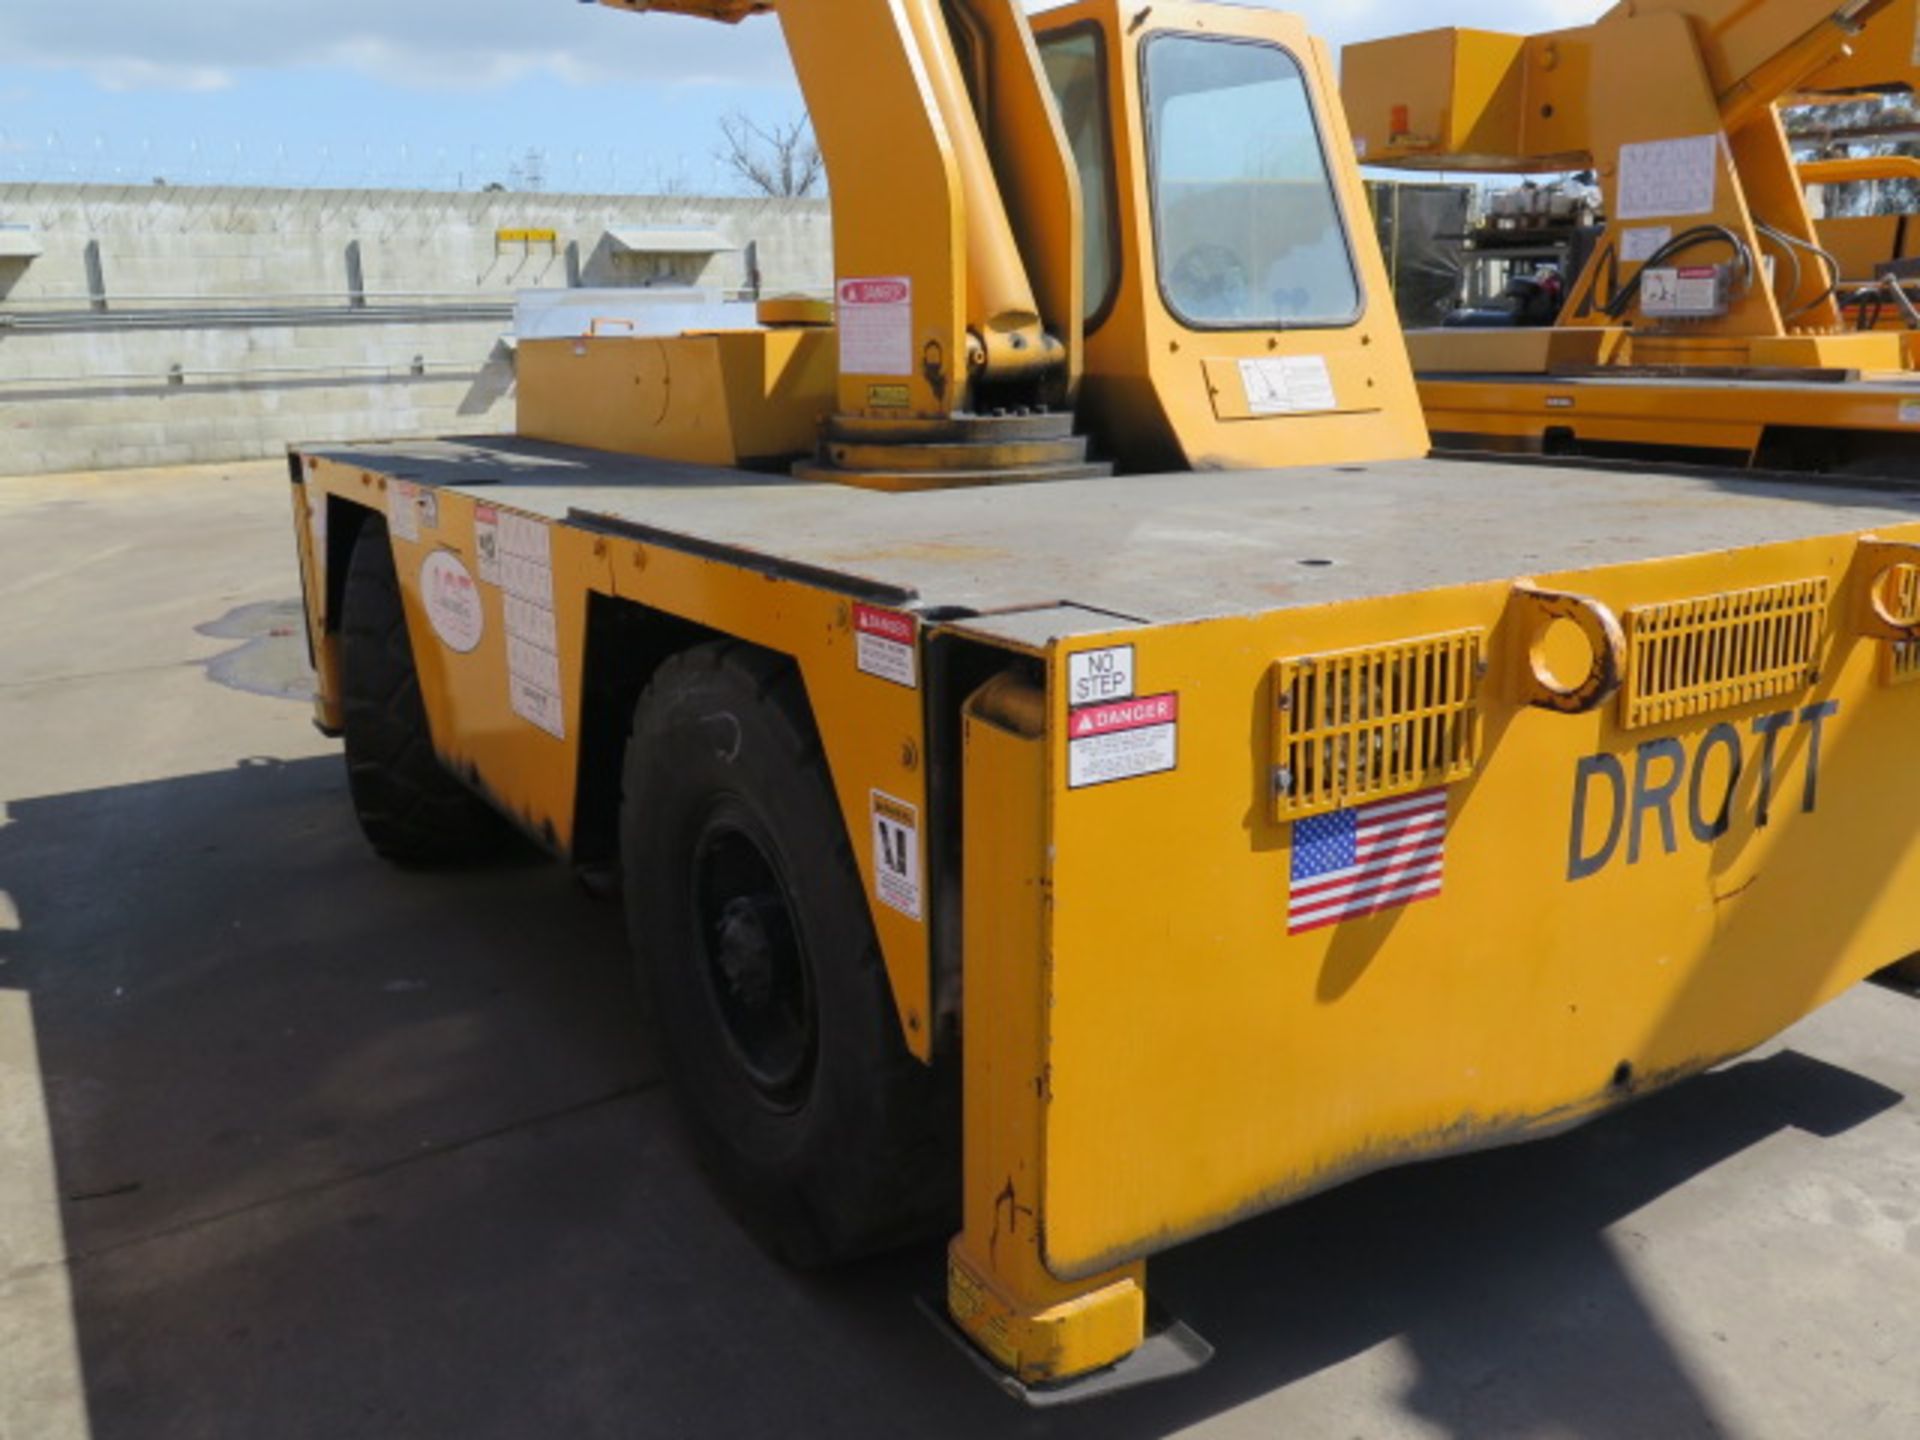 Drott 3330 12,000 Lb Cap (On Outriggers) Diesel Carry Deck Crane s/n 6225056 w/ 34’ Lift, SOLD AS IS - Image 4 of 23